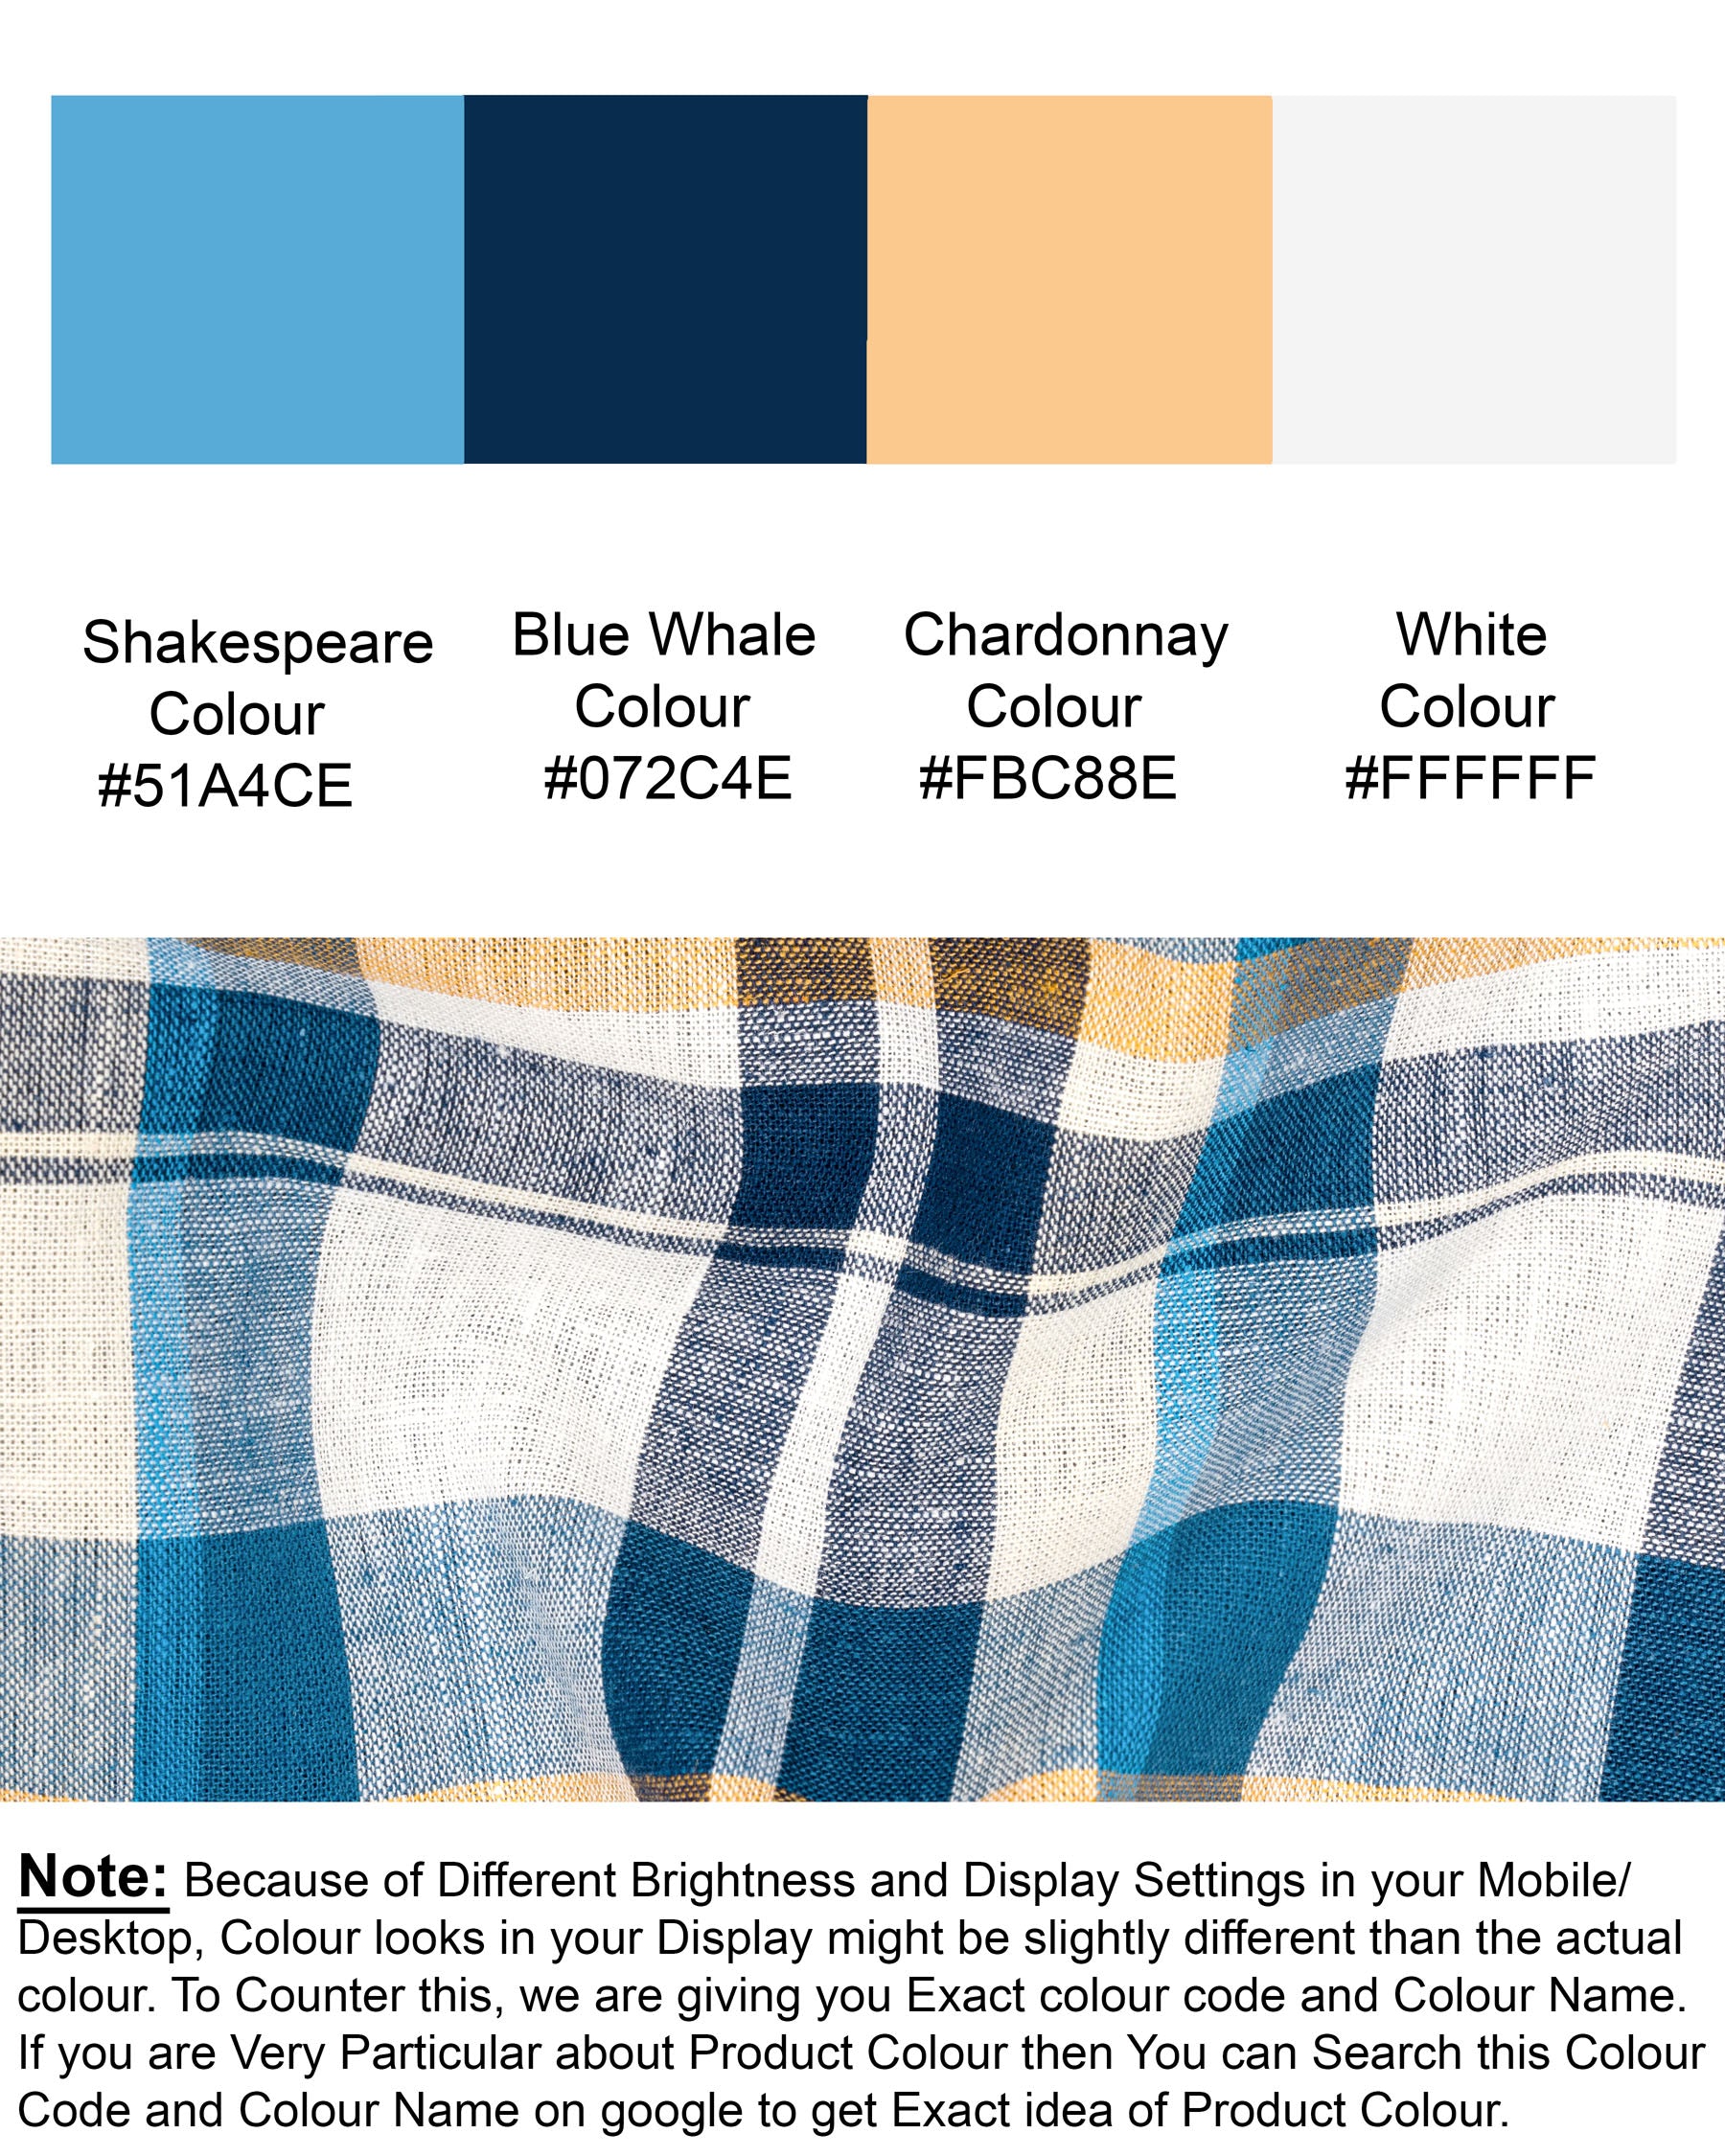 Shakespeare with Blue Whale Checkered Luxurious Linen Shirt 6725-BD-38,6725-BD-38,6725-BD-39,6725-BD-39,6725-BD-40,6725-BD-40,6725-BD-42,6725-BD-42,6725-BD-44,6725-BD-44,6725-BD-46,6725-BD-46,6725-BD-48,6725-BD-48,6725-BD-50,6725-BD-50,6725-BD-52,6725-BD-52